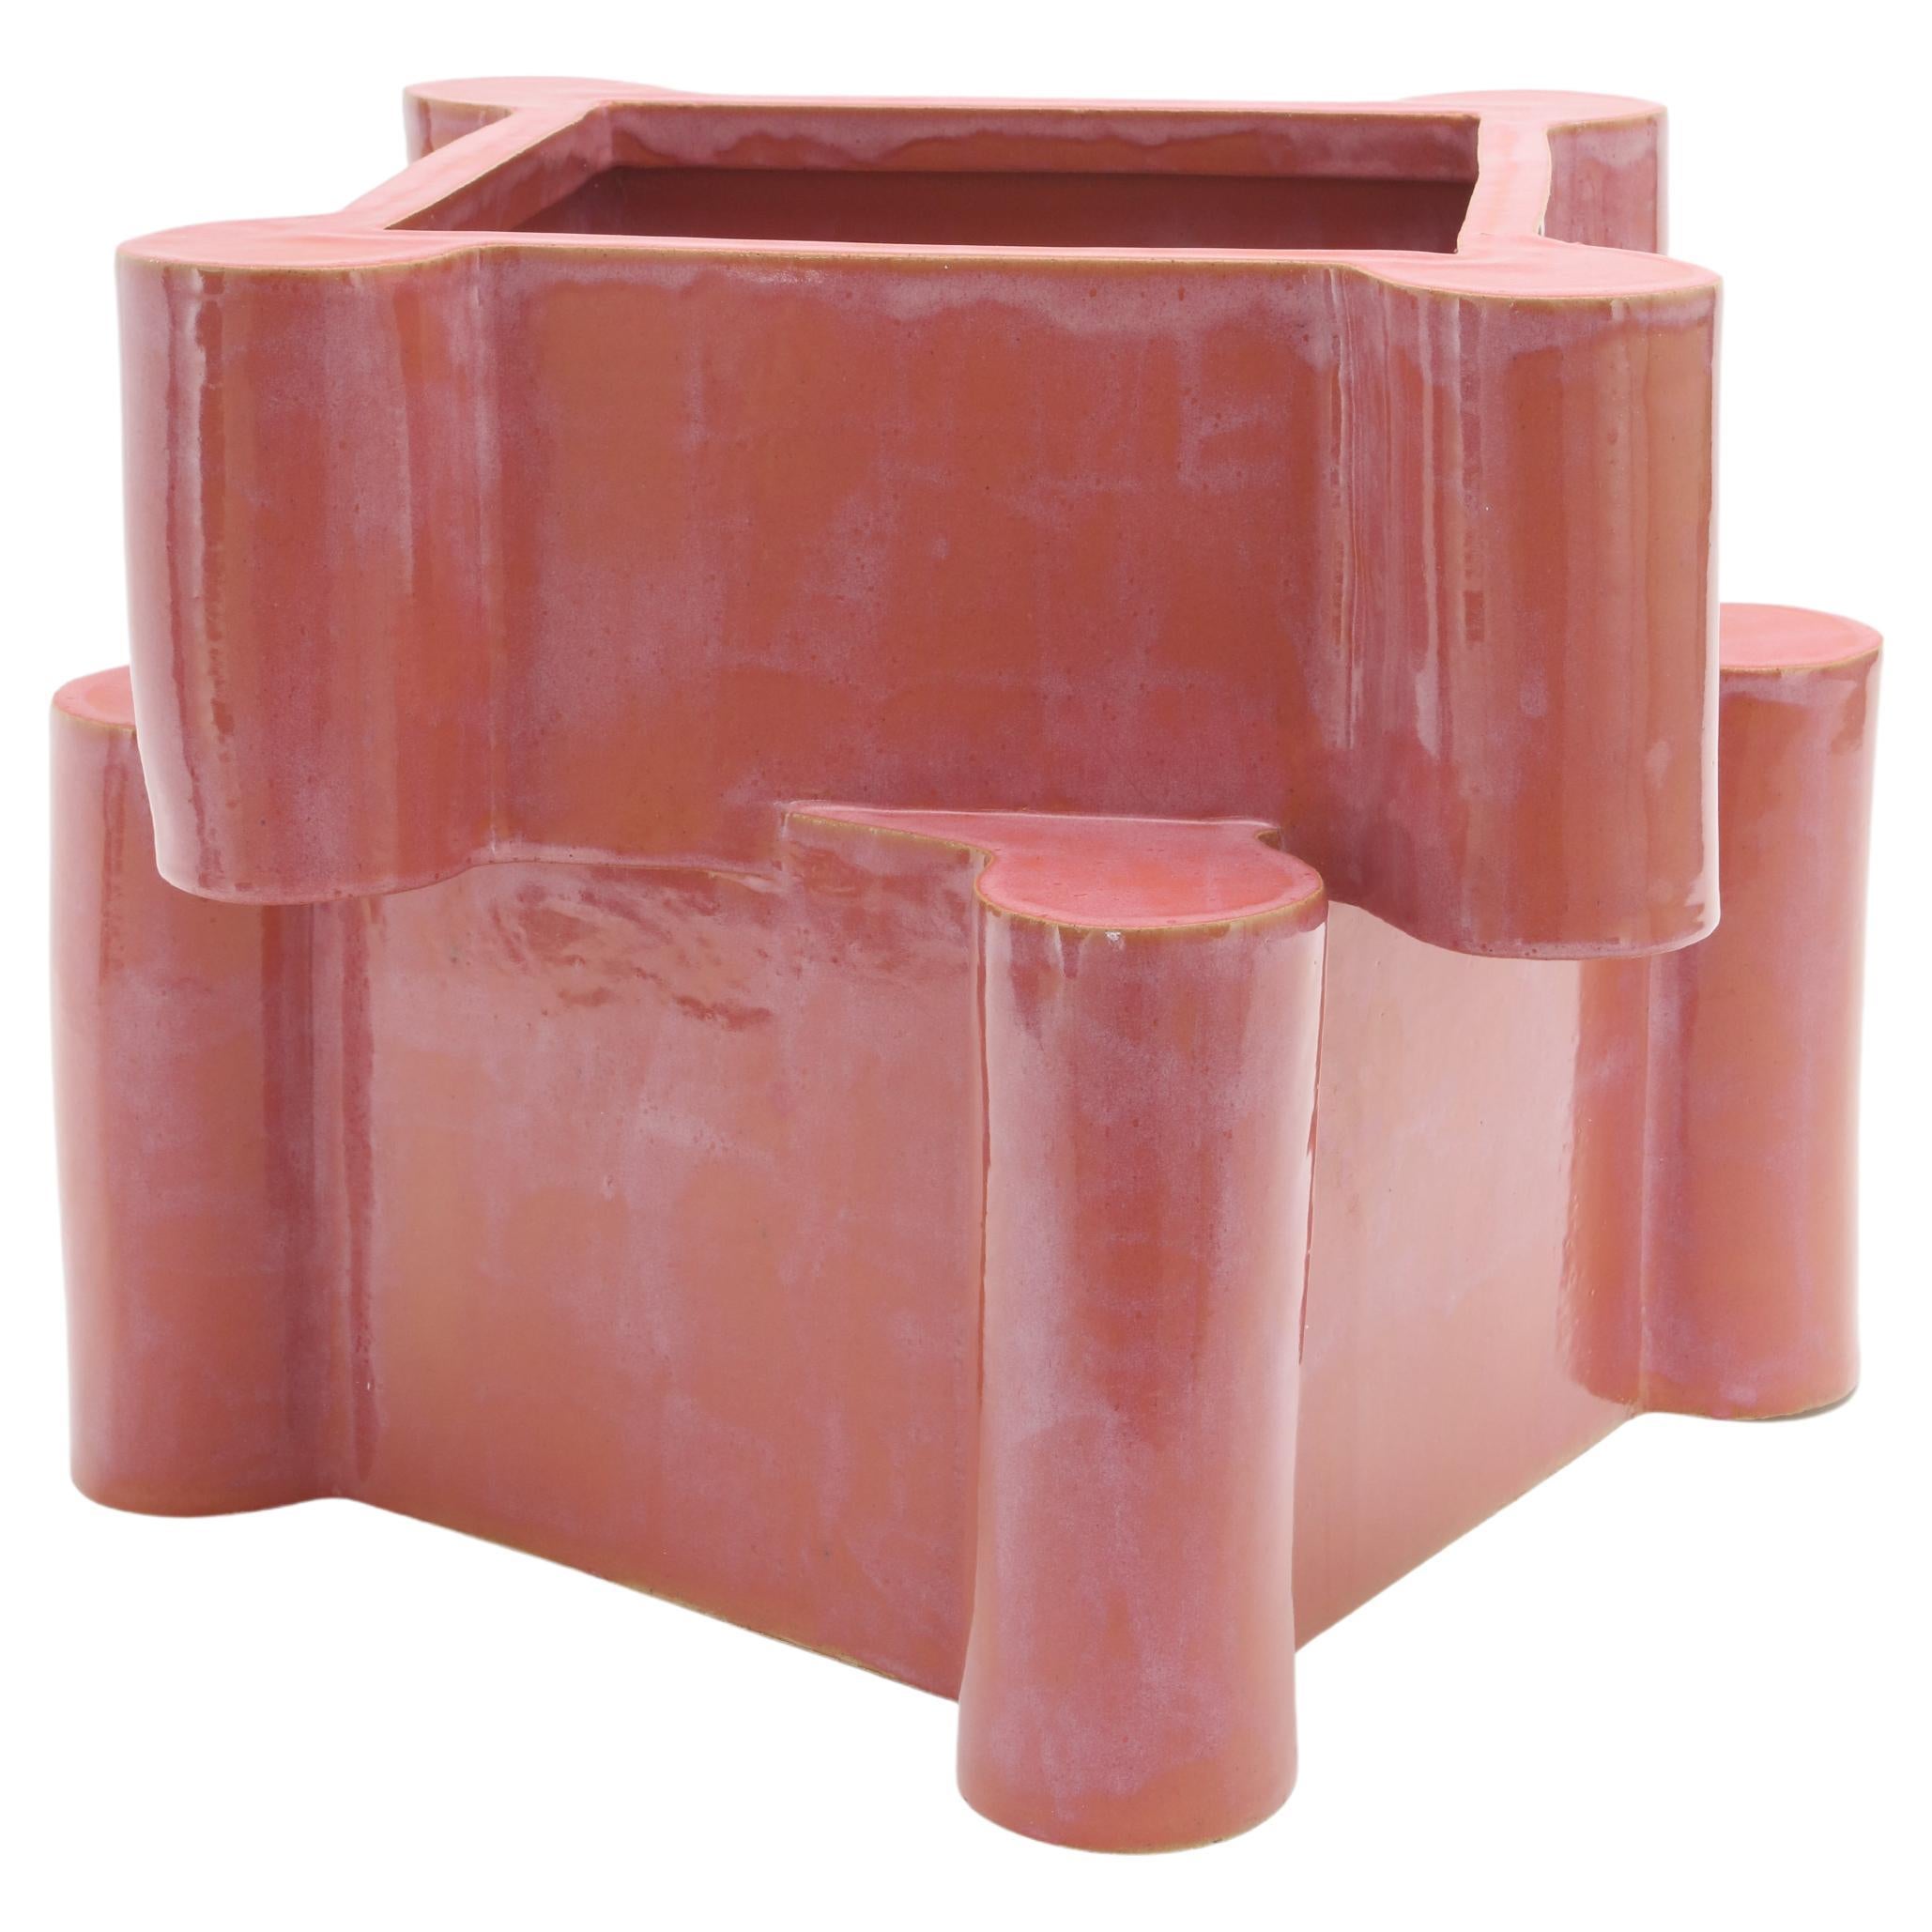 Twisted Castle Ceramic Planter in Sunset Pink by Bzippy For Sale